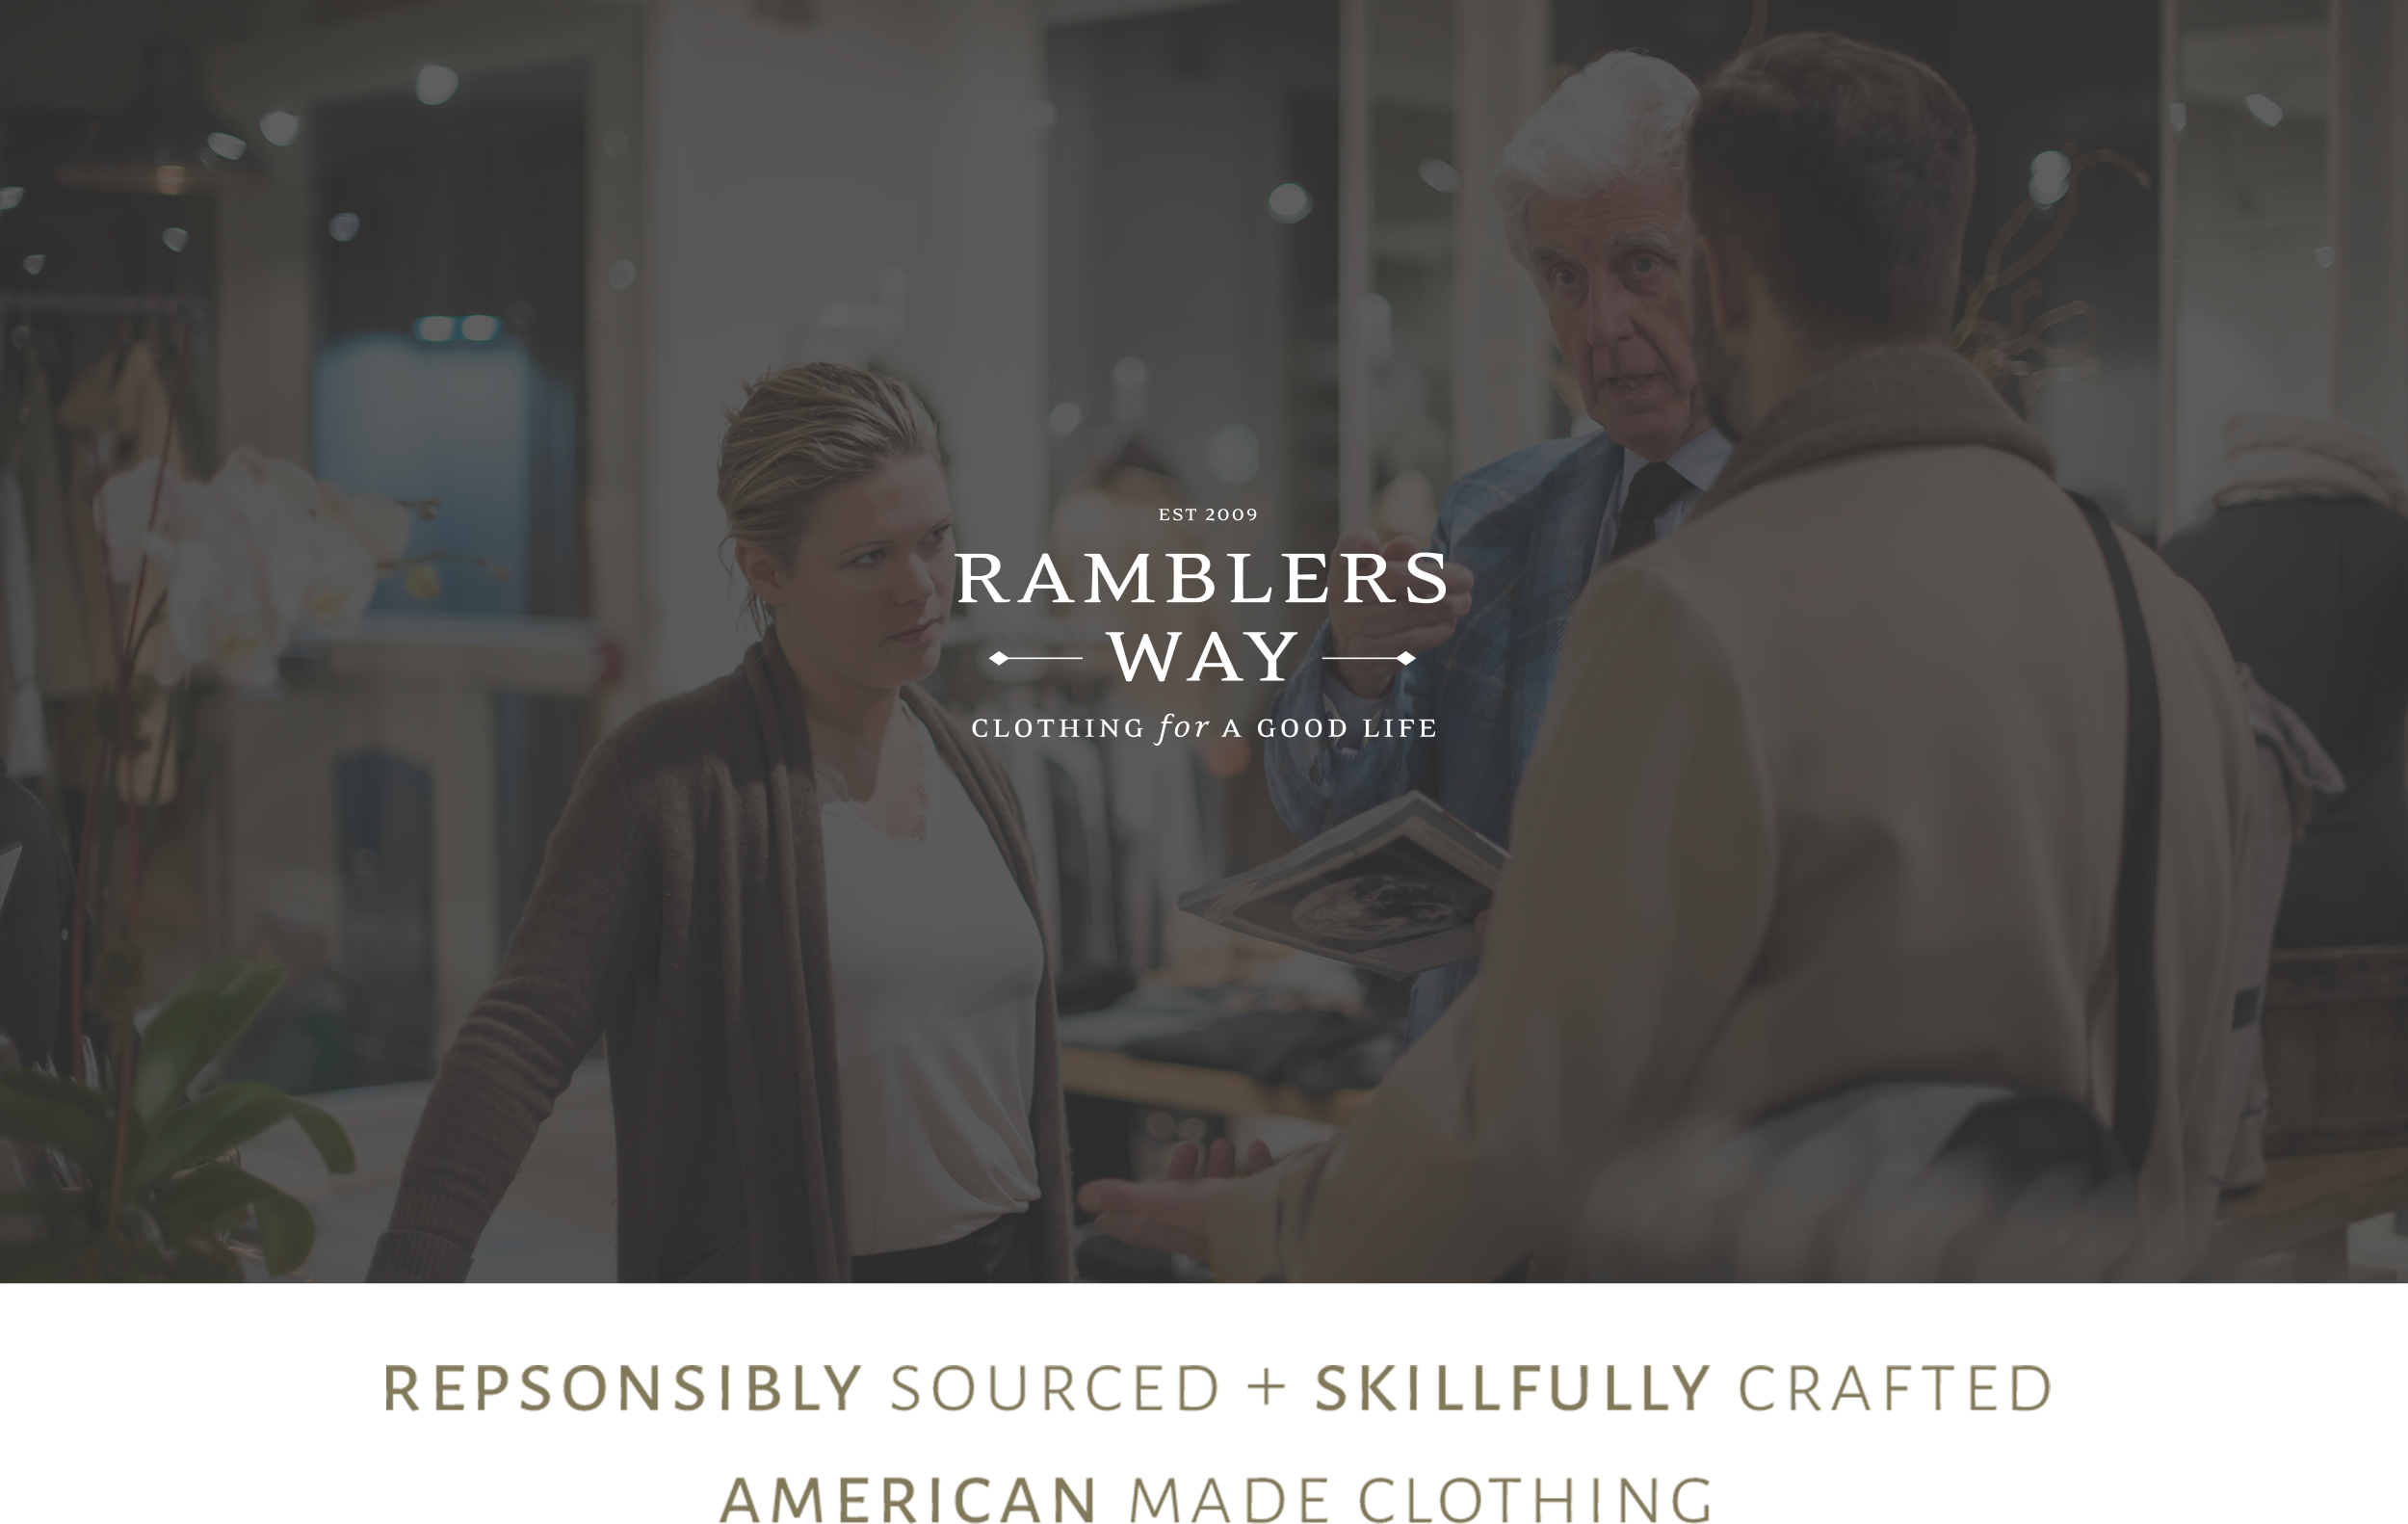 Tom Chappell, Founder and CEO, standing in Ramblers Way store.